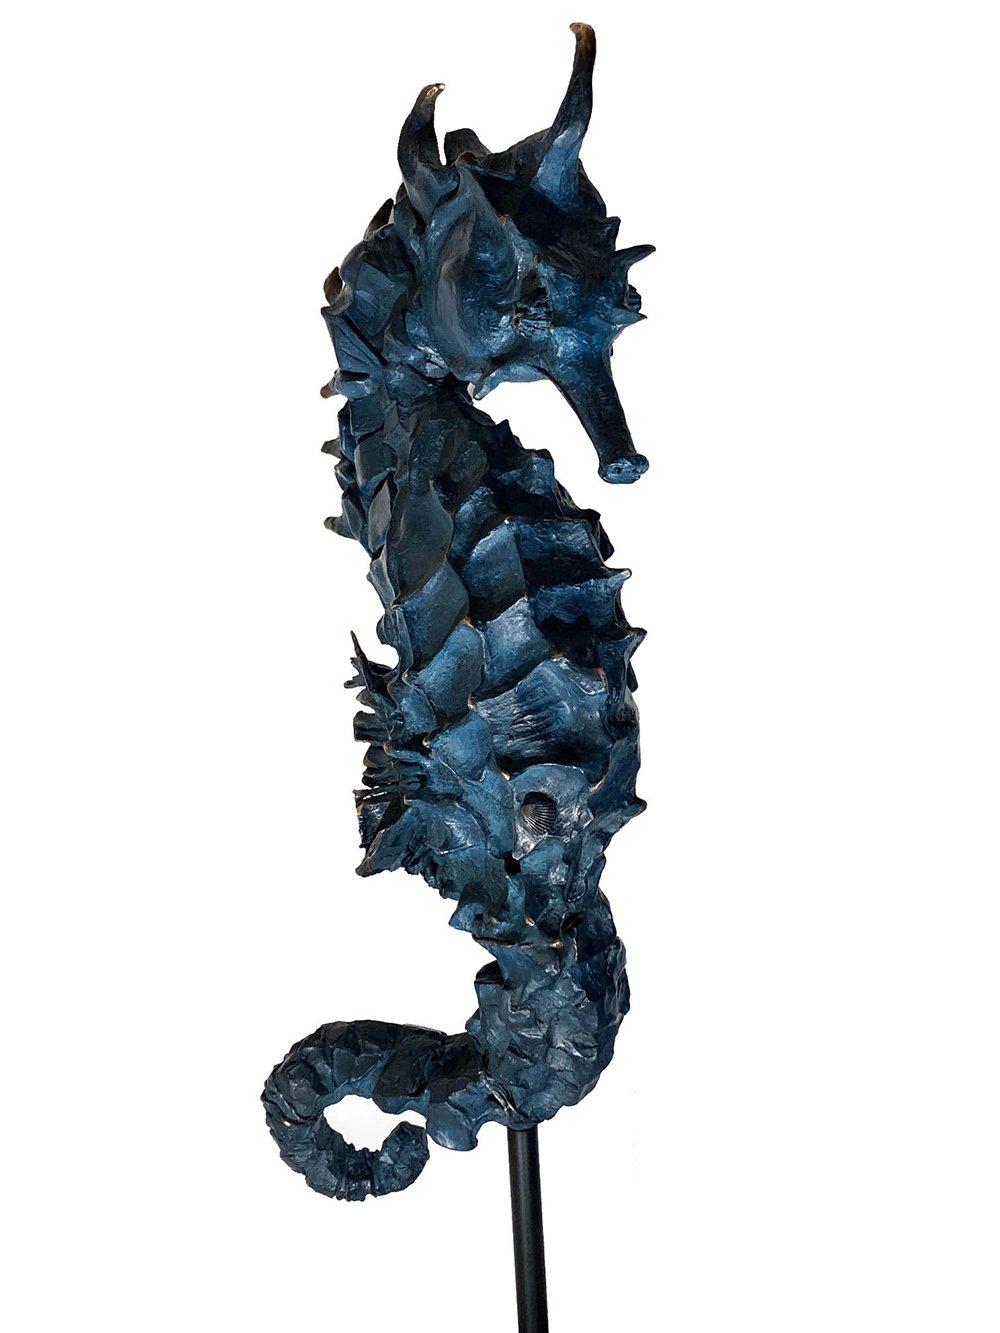 Ultramarine Rex Seahorse is a 45-inch high bronze sculpture by French contemporary artist Chésade. This one-off sculpture is representative of the sculptor's interest in the marine world.
The specified dimensions include the stand and the shaft.